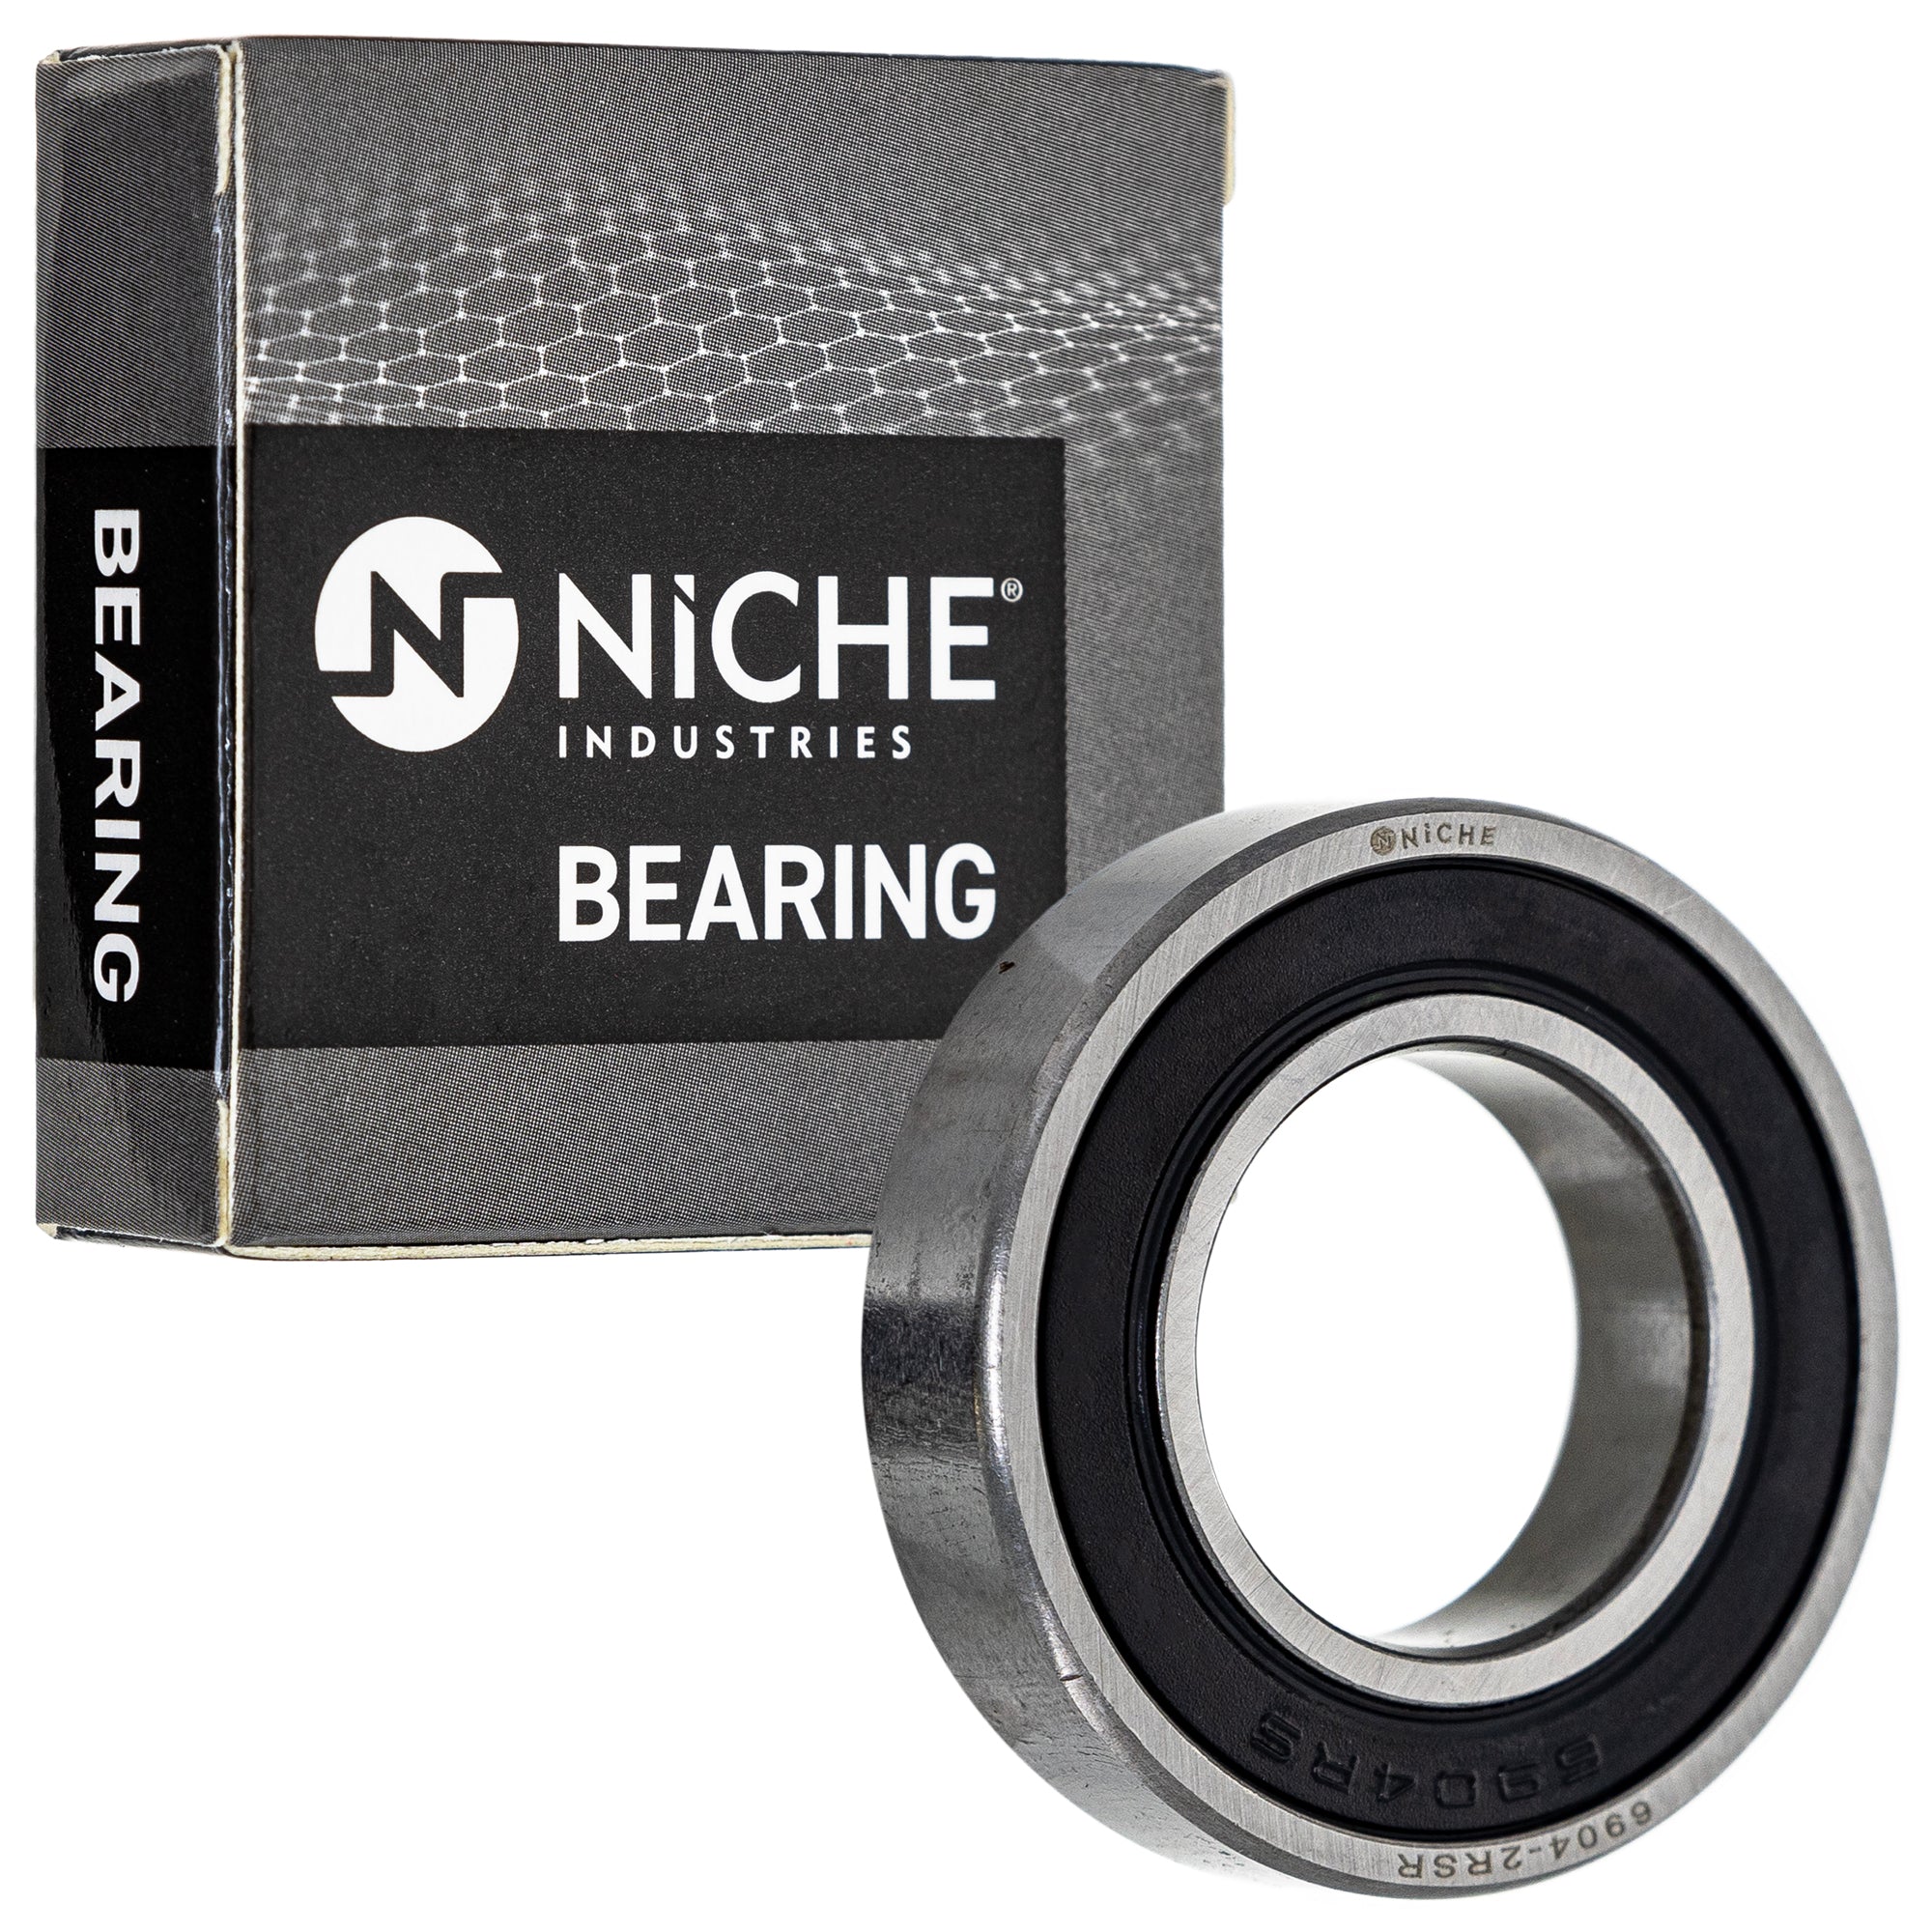 NICHE 519-CBB2287R Bearing & Seal Kit for zOTHER WR450F WR426F WR400F